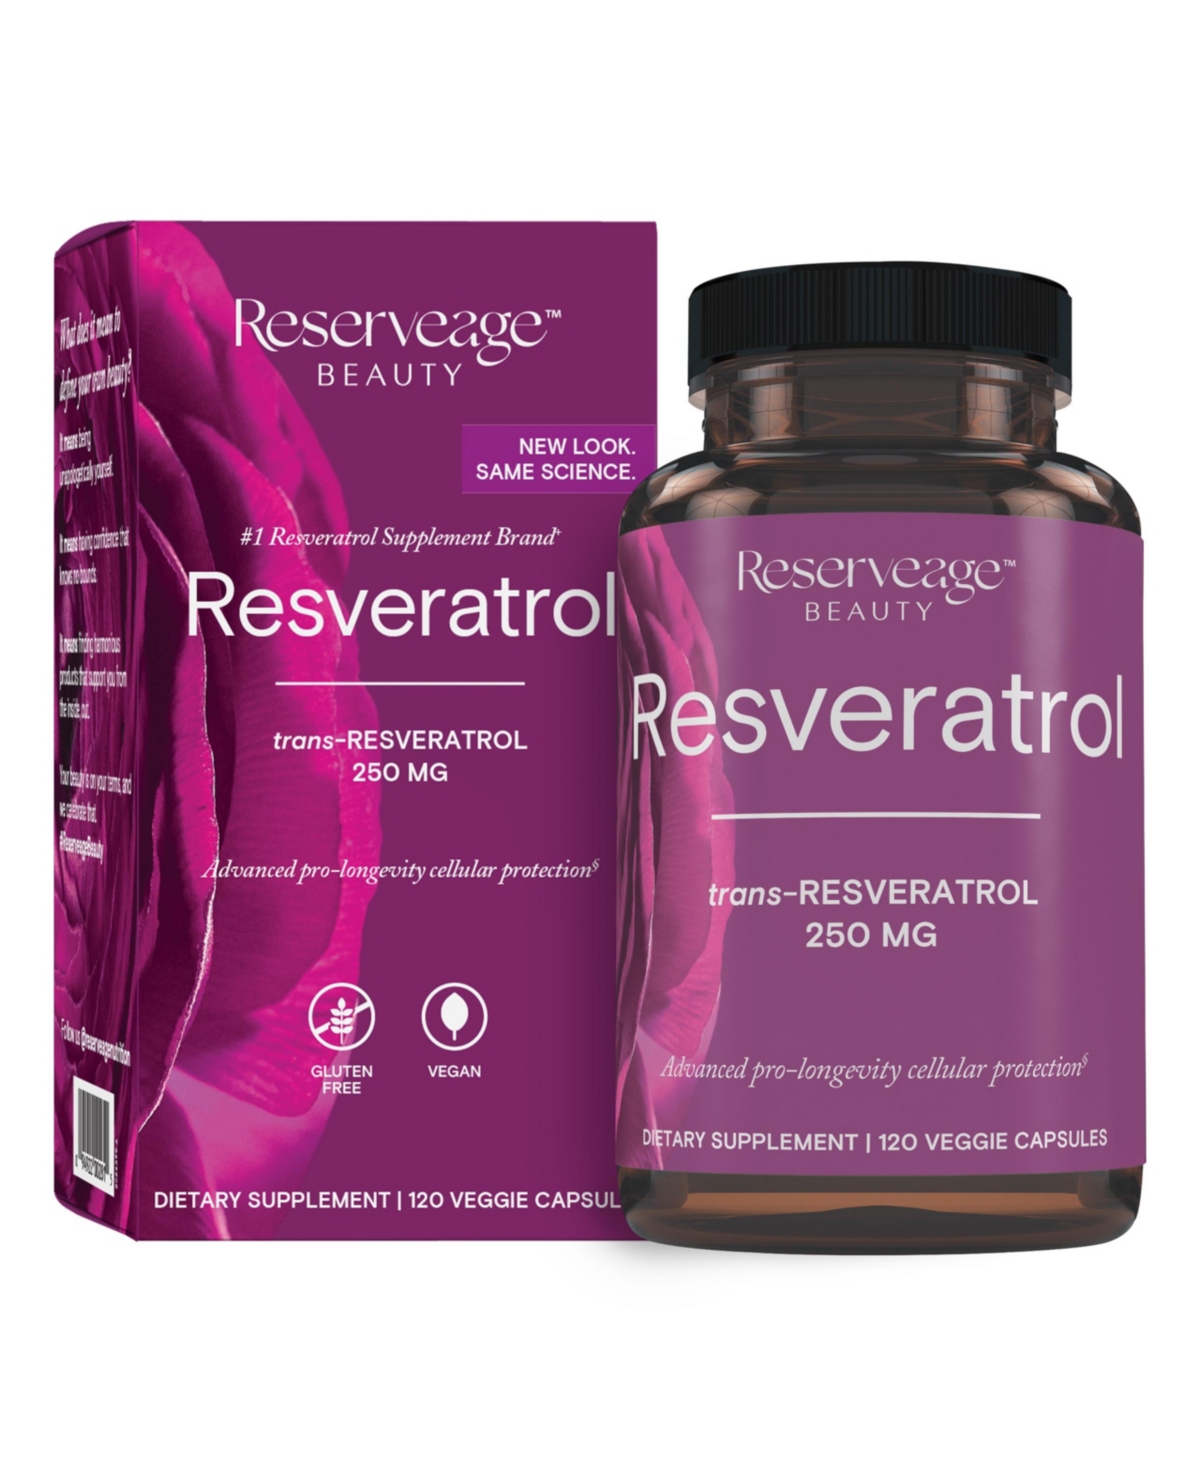 Resveratrol 250 mg, Antioxidant Supplement for Heart and Cellular Health, Supports Healthy Aging, Paleo, Keto, 120 Capsules